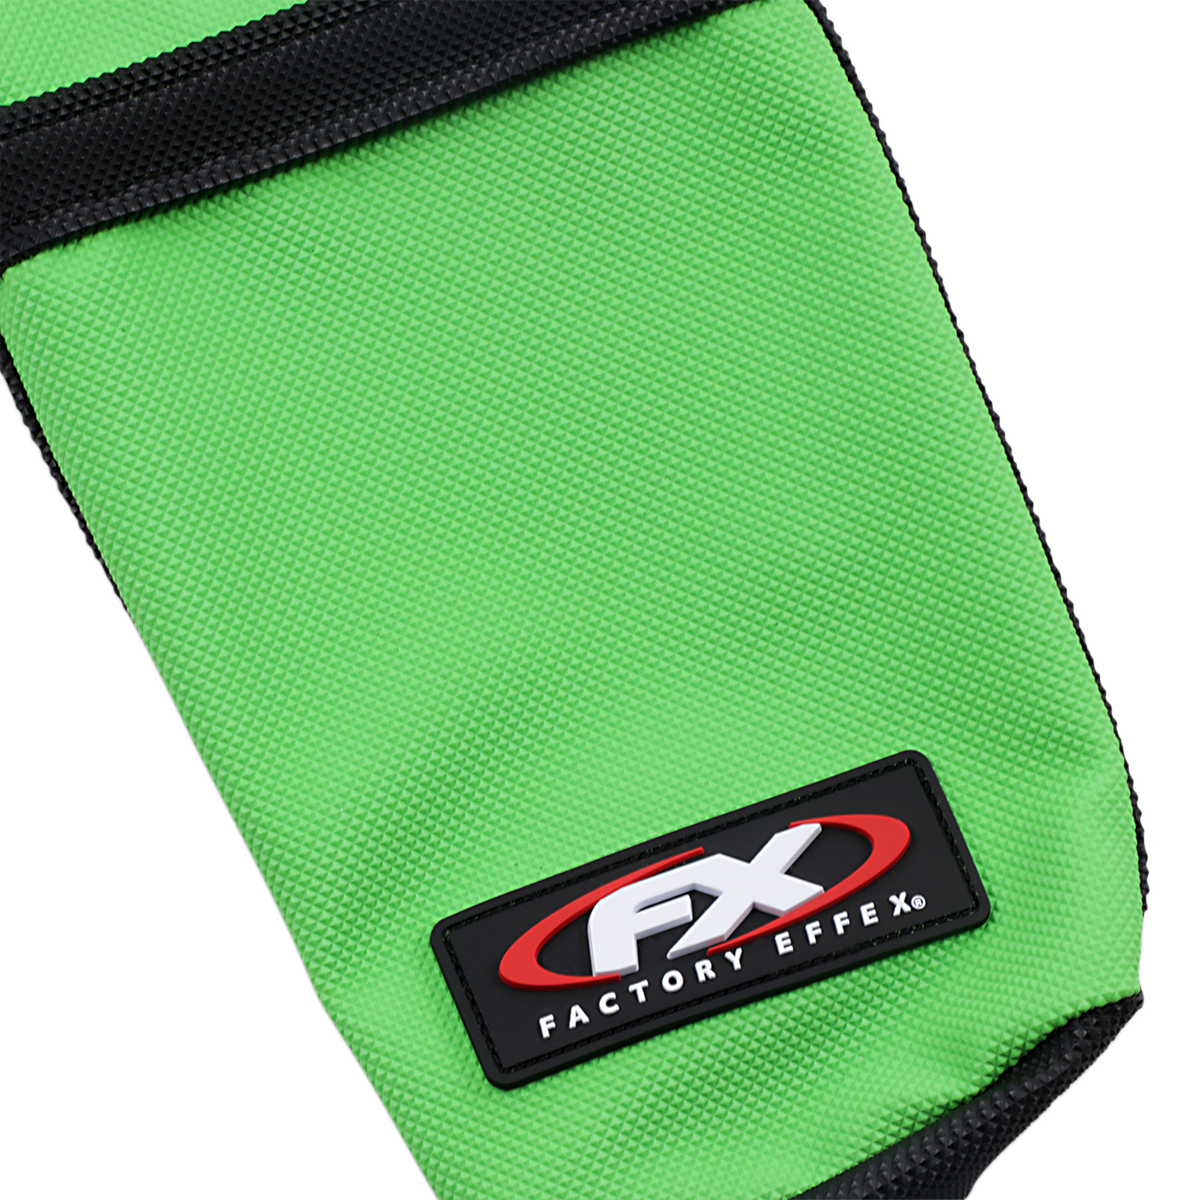 FACTORY EFFEX RS1 Seat Cover - KX 450F 22-29138